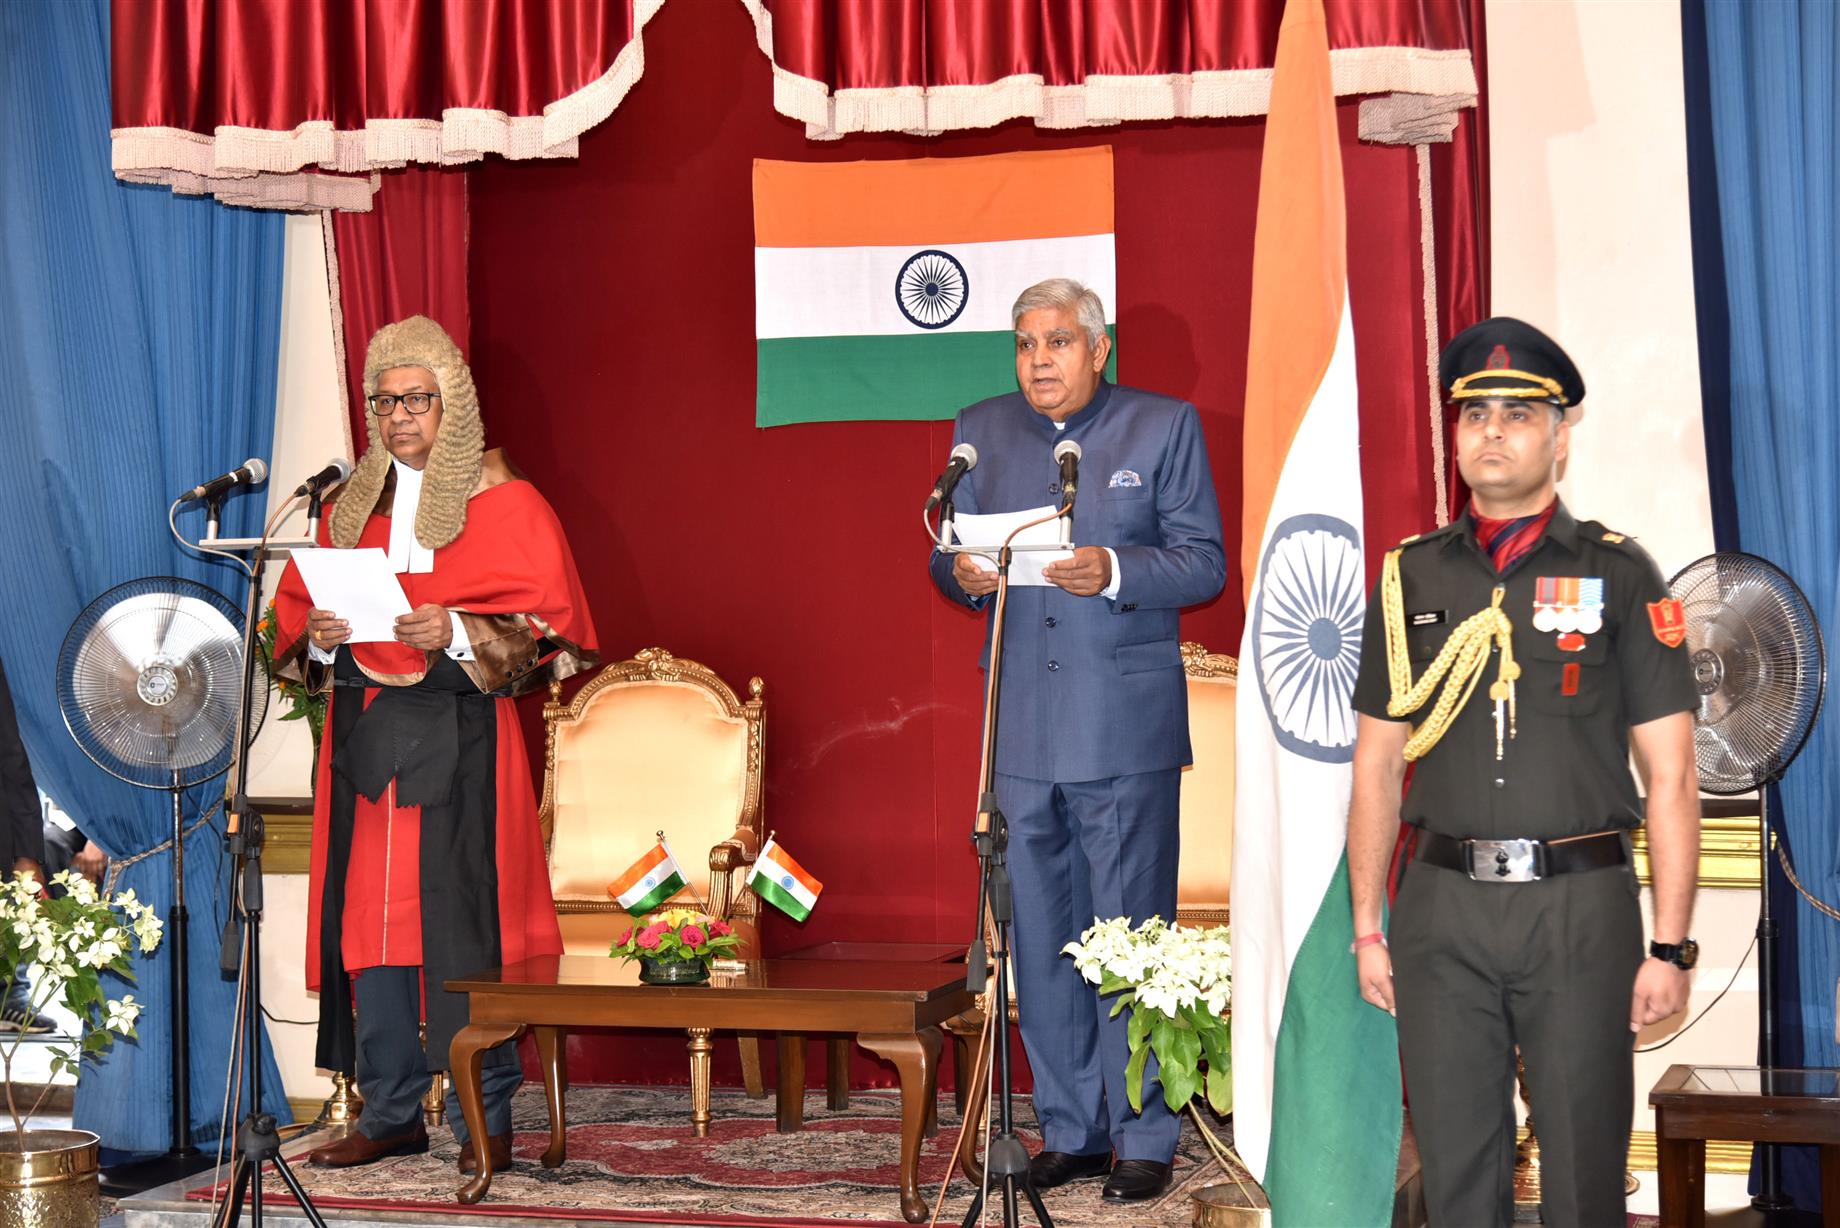 The Chief Justice of Calcutta High Court Shri Thottathil B Radhakrishnan administering oath  to the new governor of  West Bengal Shri Jagdeep Dhankhar in the Swearing-in-Ceremony at Raj Bhawan, Kolkata on July 30, 2019.